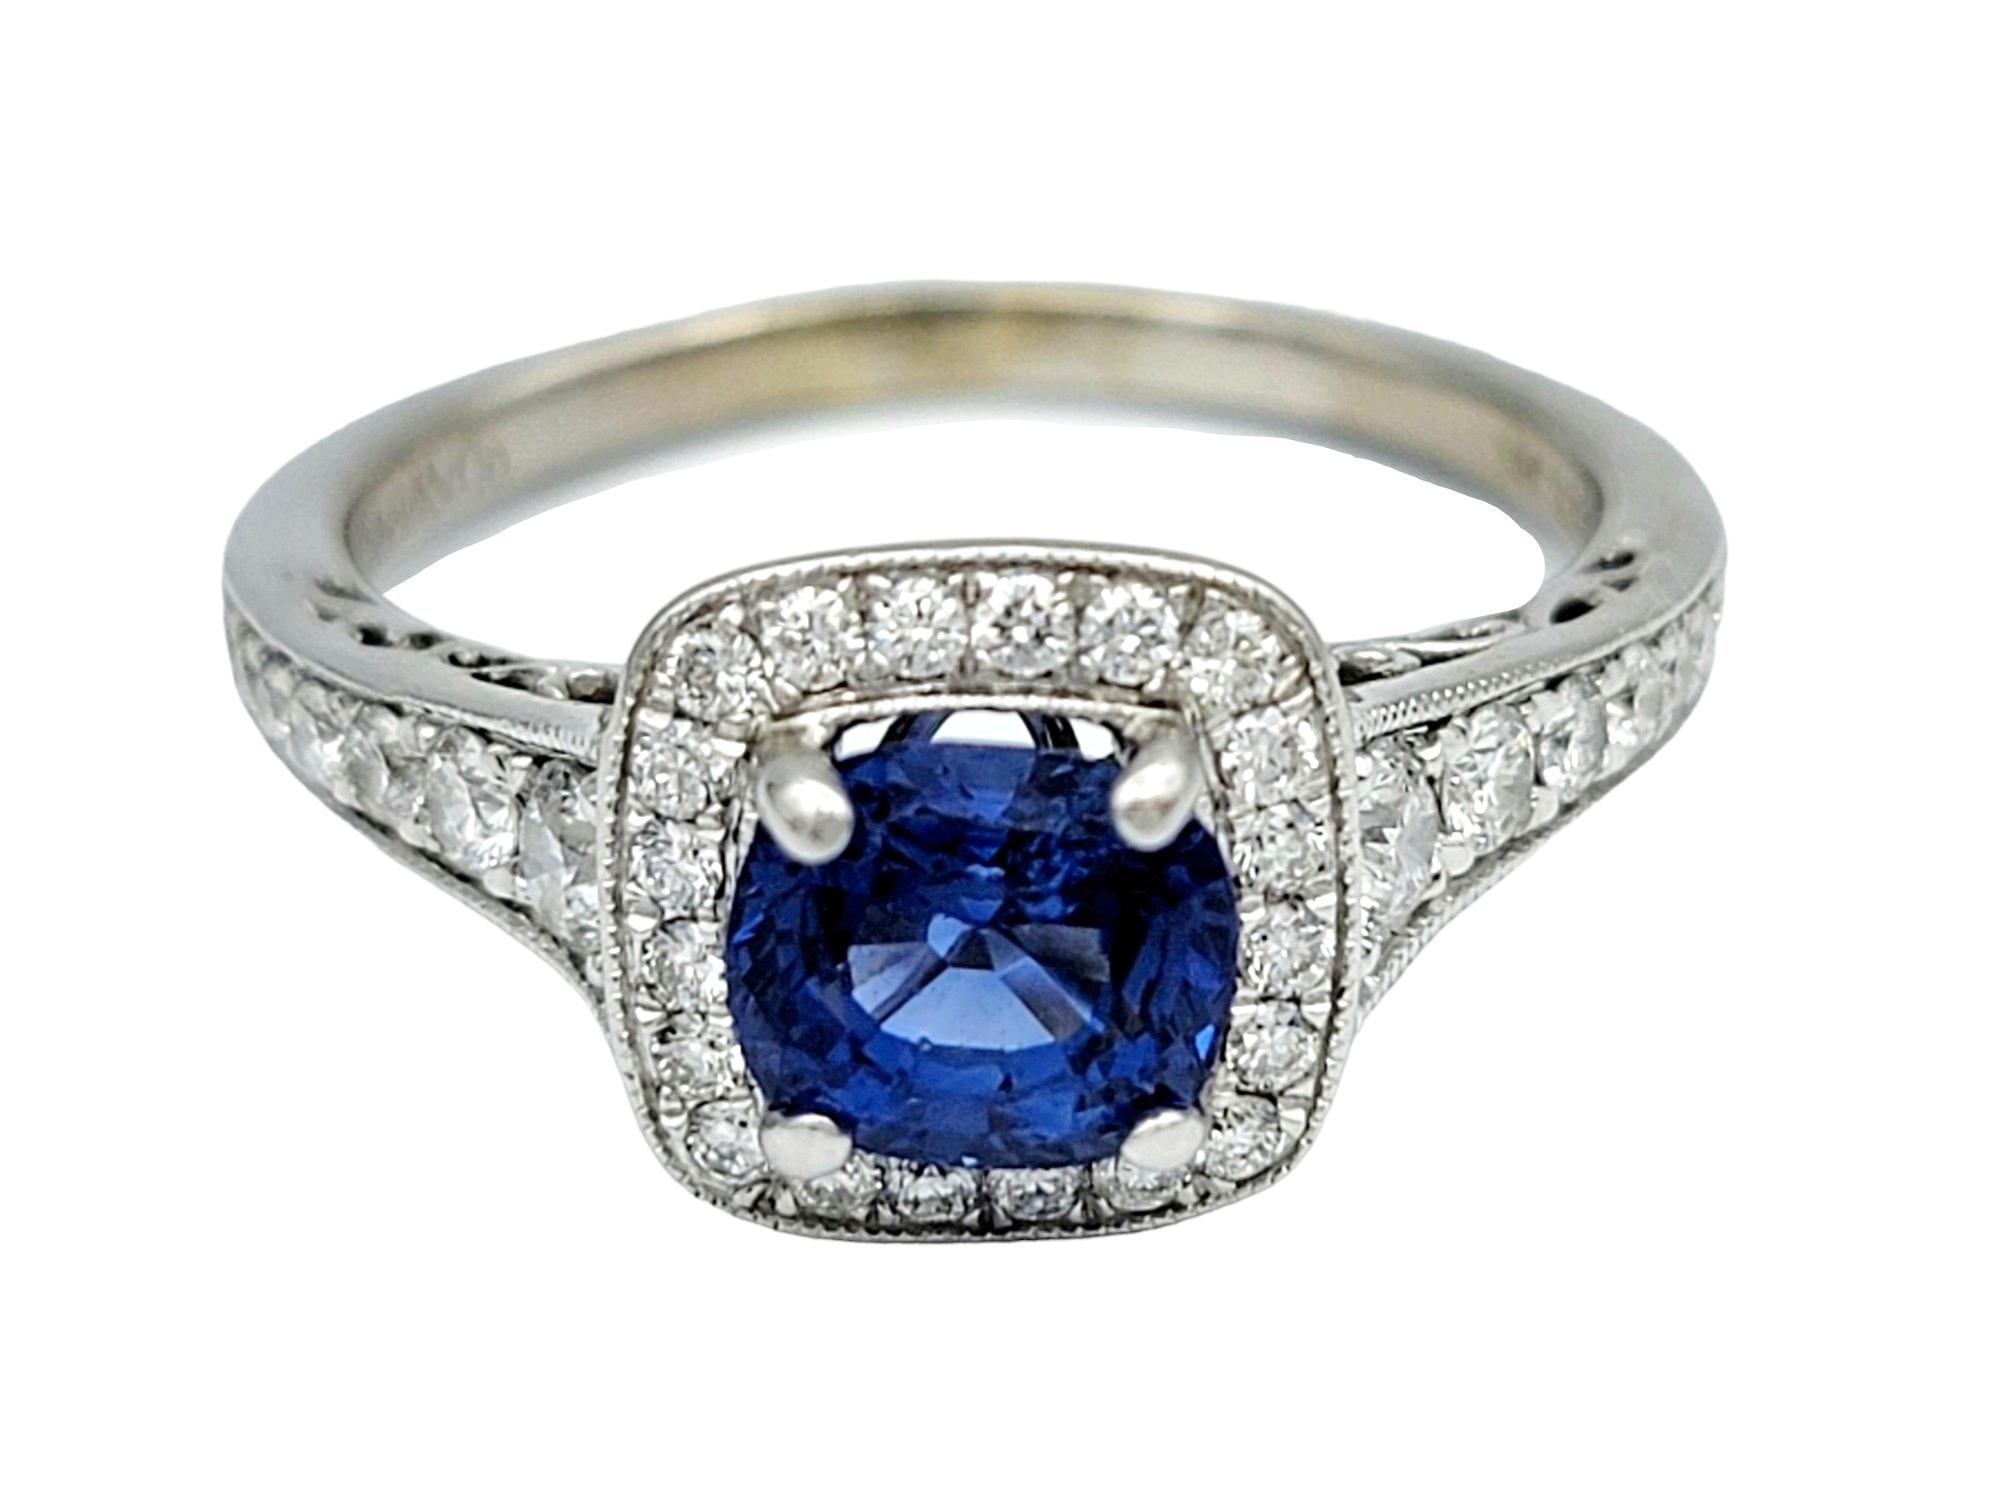 Gabriel & Co. Cushion Cut Blue Sapphire Diamond Halo Ring in 14 Karat White Gold In Good Condition For Sale In Scottsdale, AZ